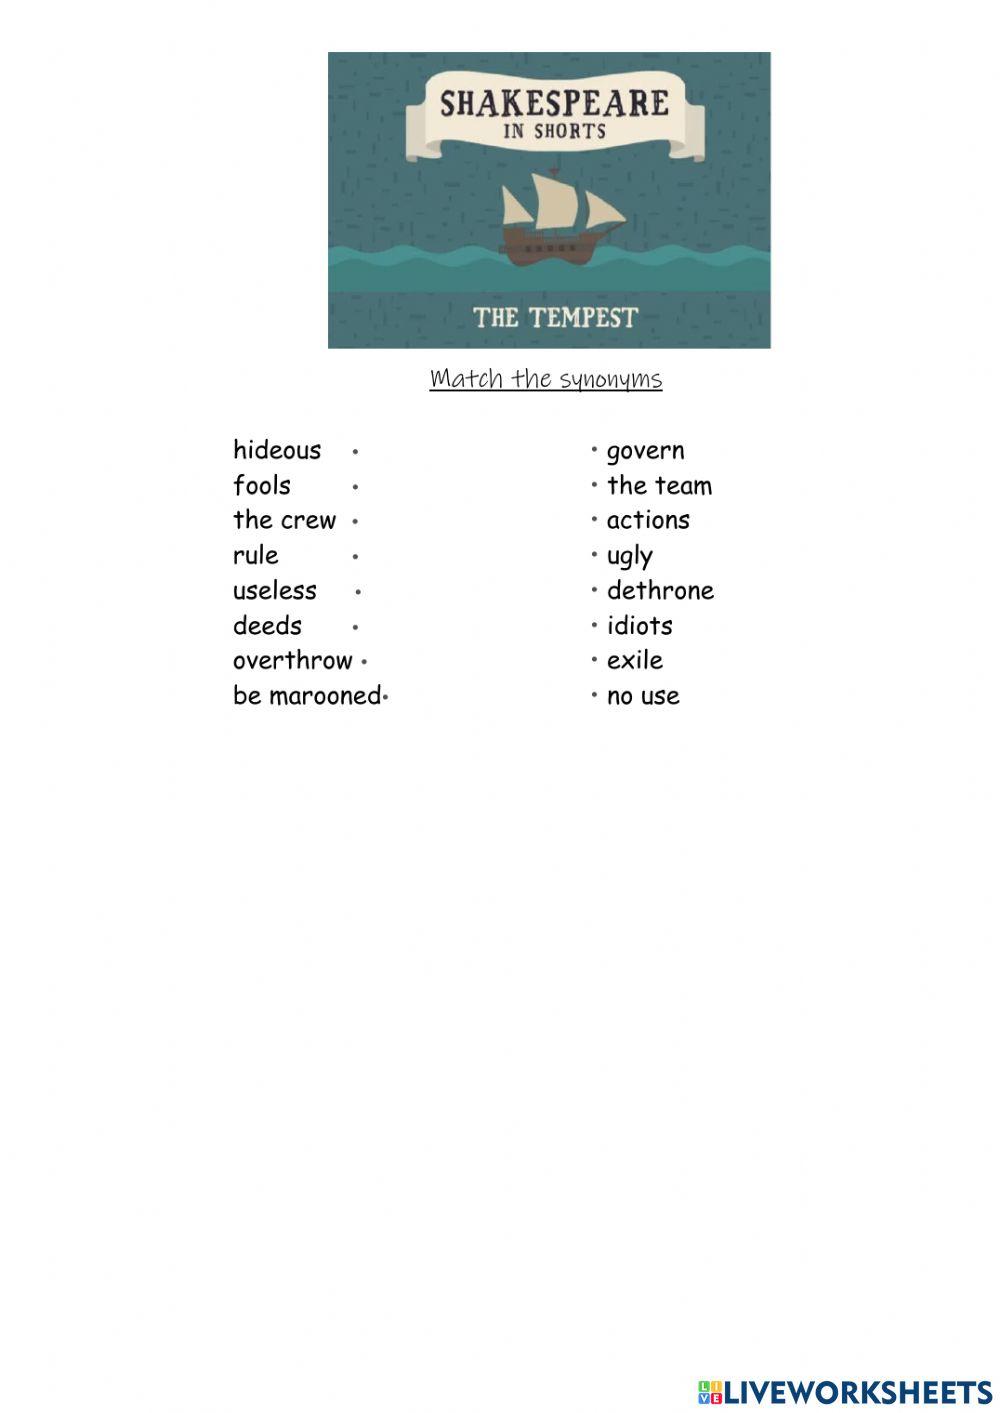 The Tempest by Shakespeare